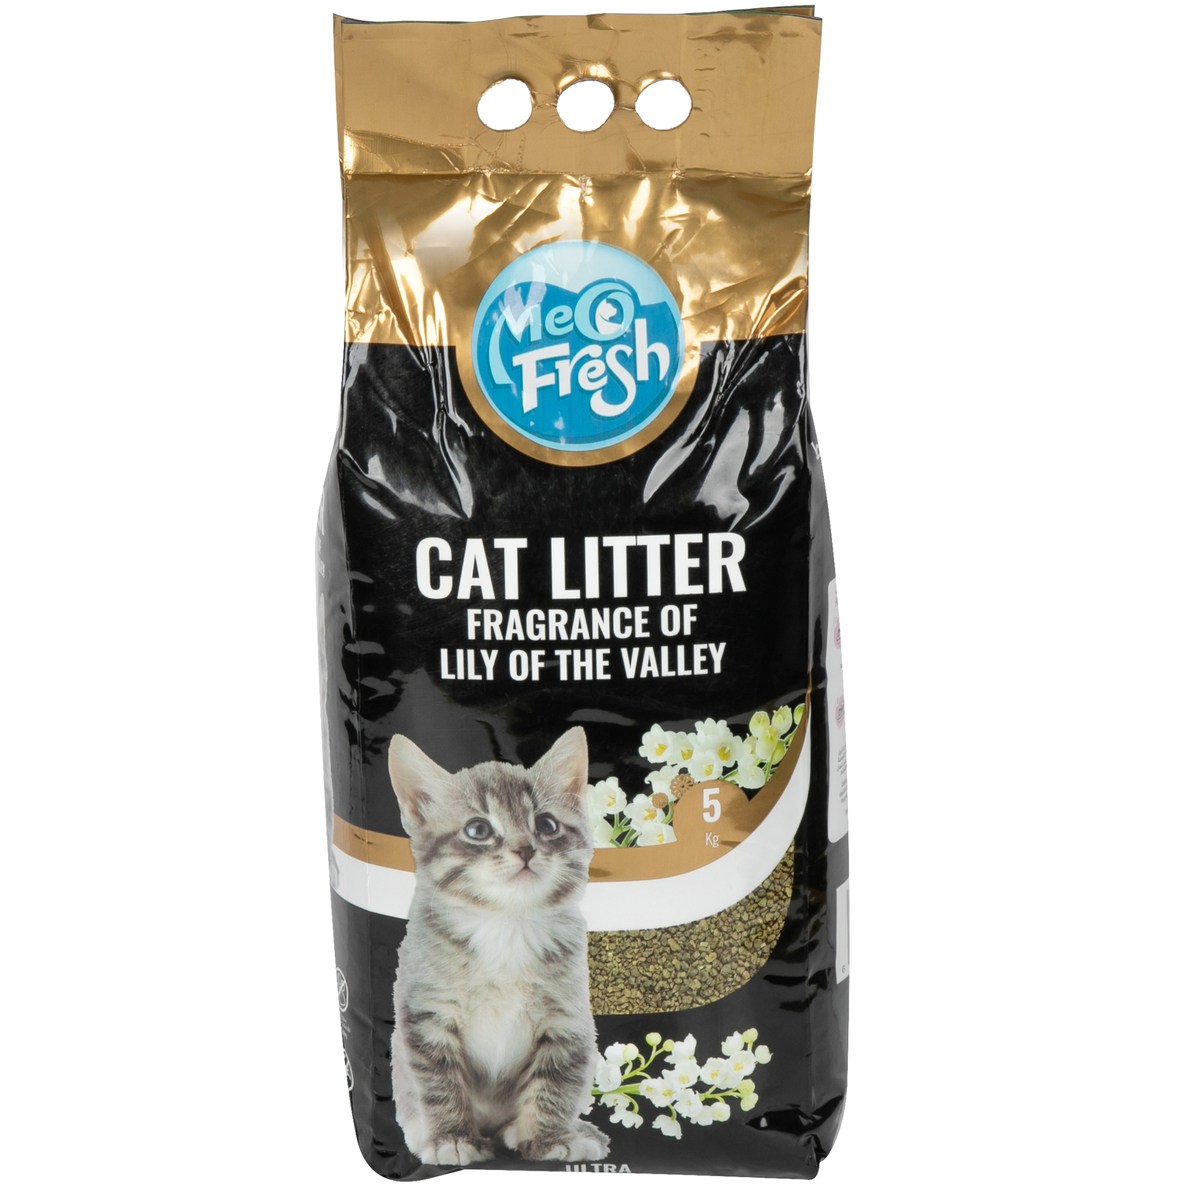 Meo Fresh Fragrance Of Lily Of The Valley Cat Litter 5kg